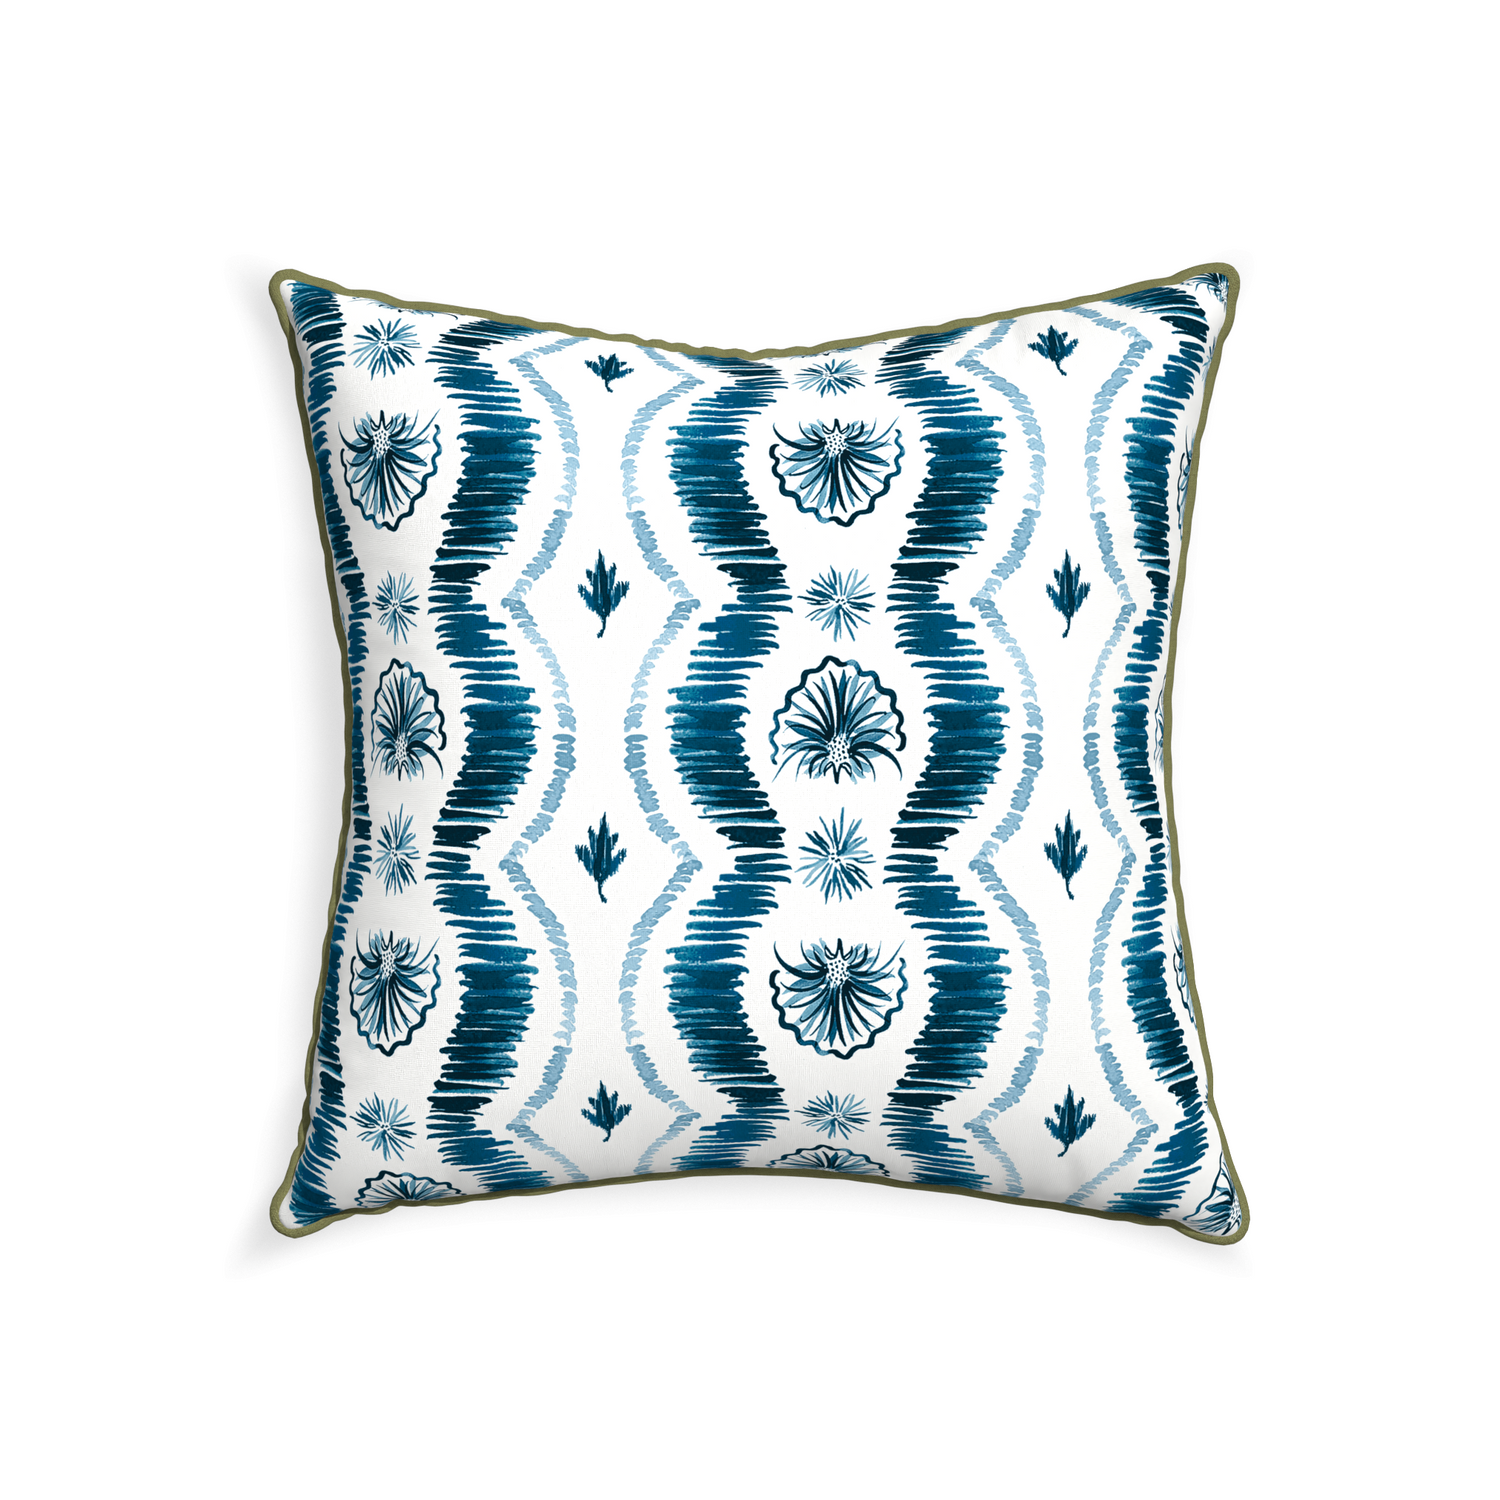 22-square alice custom blue ikatpillow with moss piping on white background